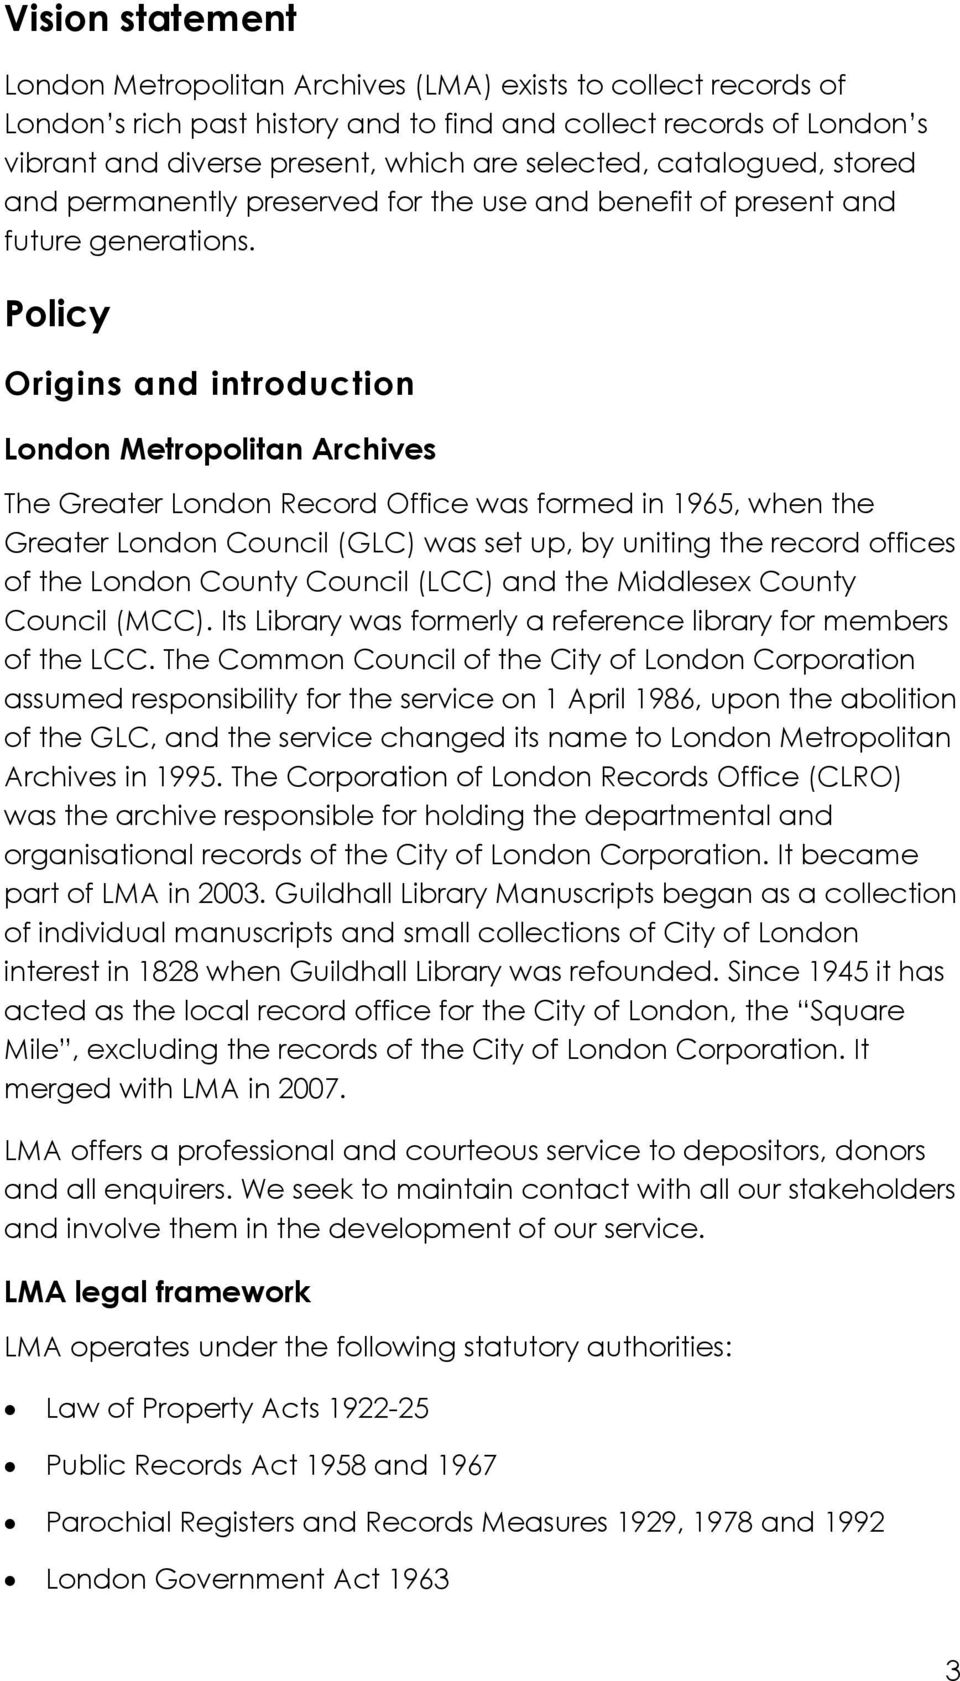 Policy Origins and introduction London Metropolitan Archives The Greater London Record Office was formed in 1965, when the Greater London Council (GLC) was set up, by uniting the record offices of